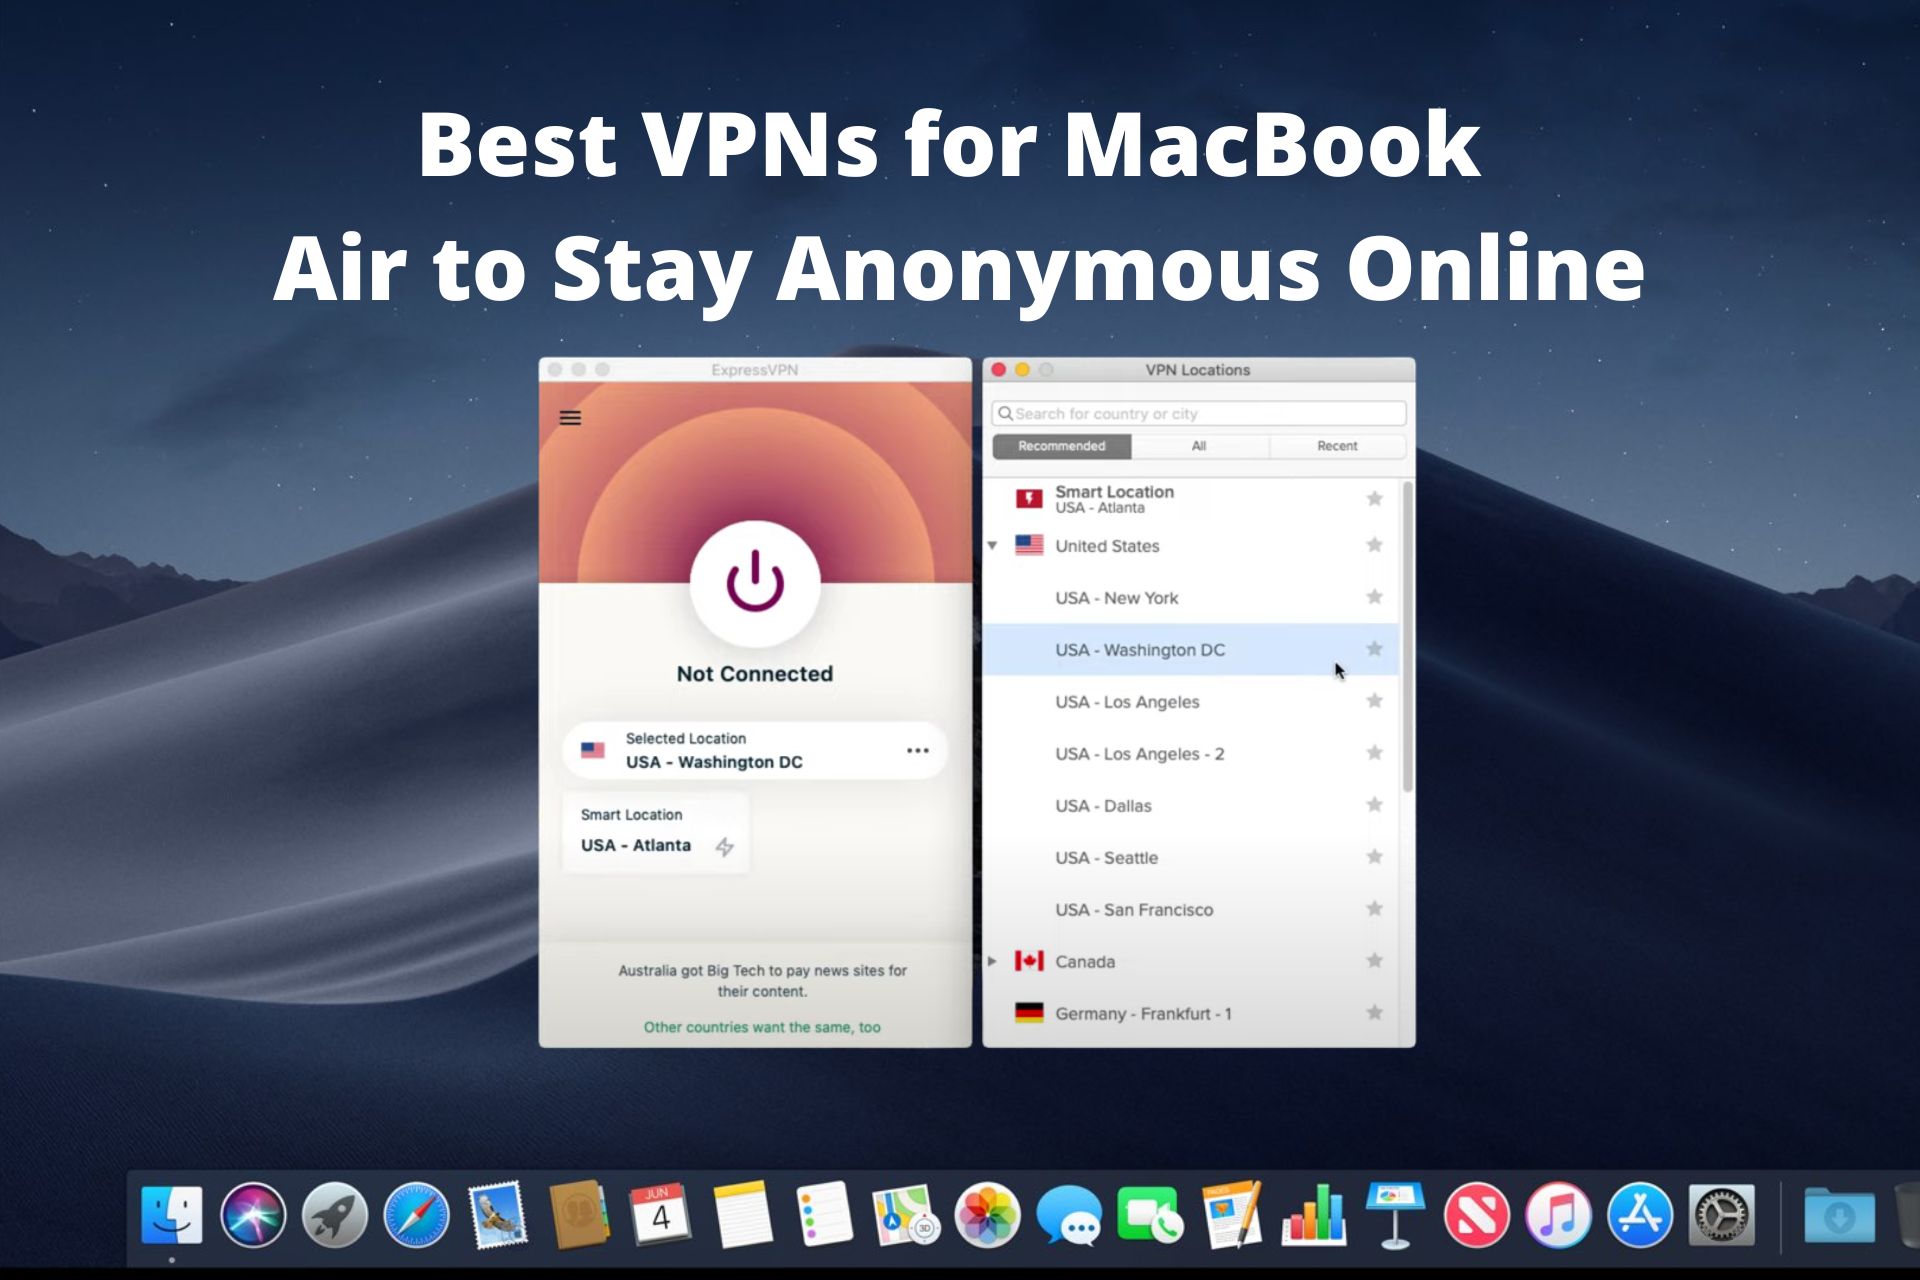 7 Best VPNs for Macbook Air to Stay Completely Anonymous